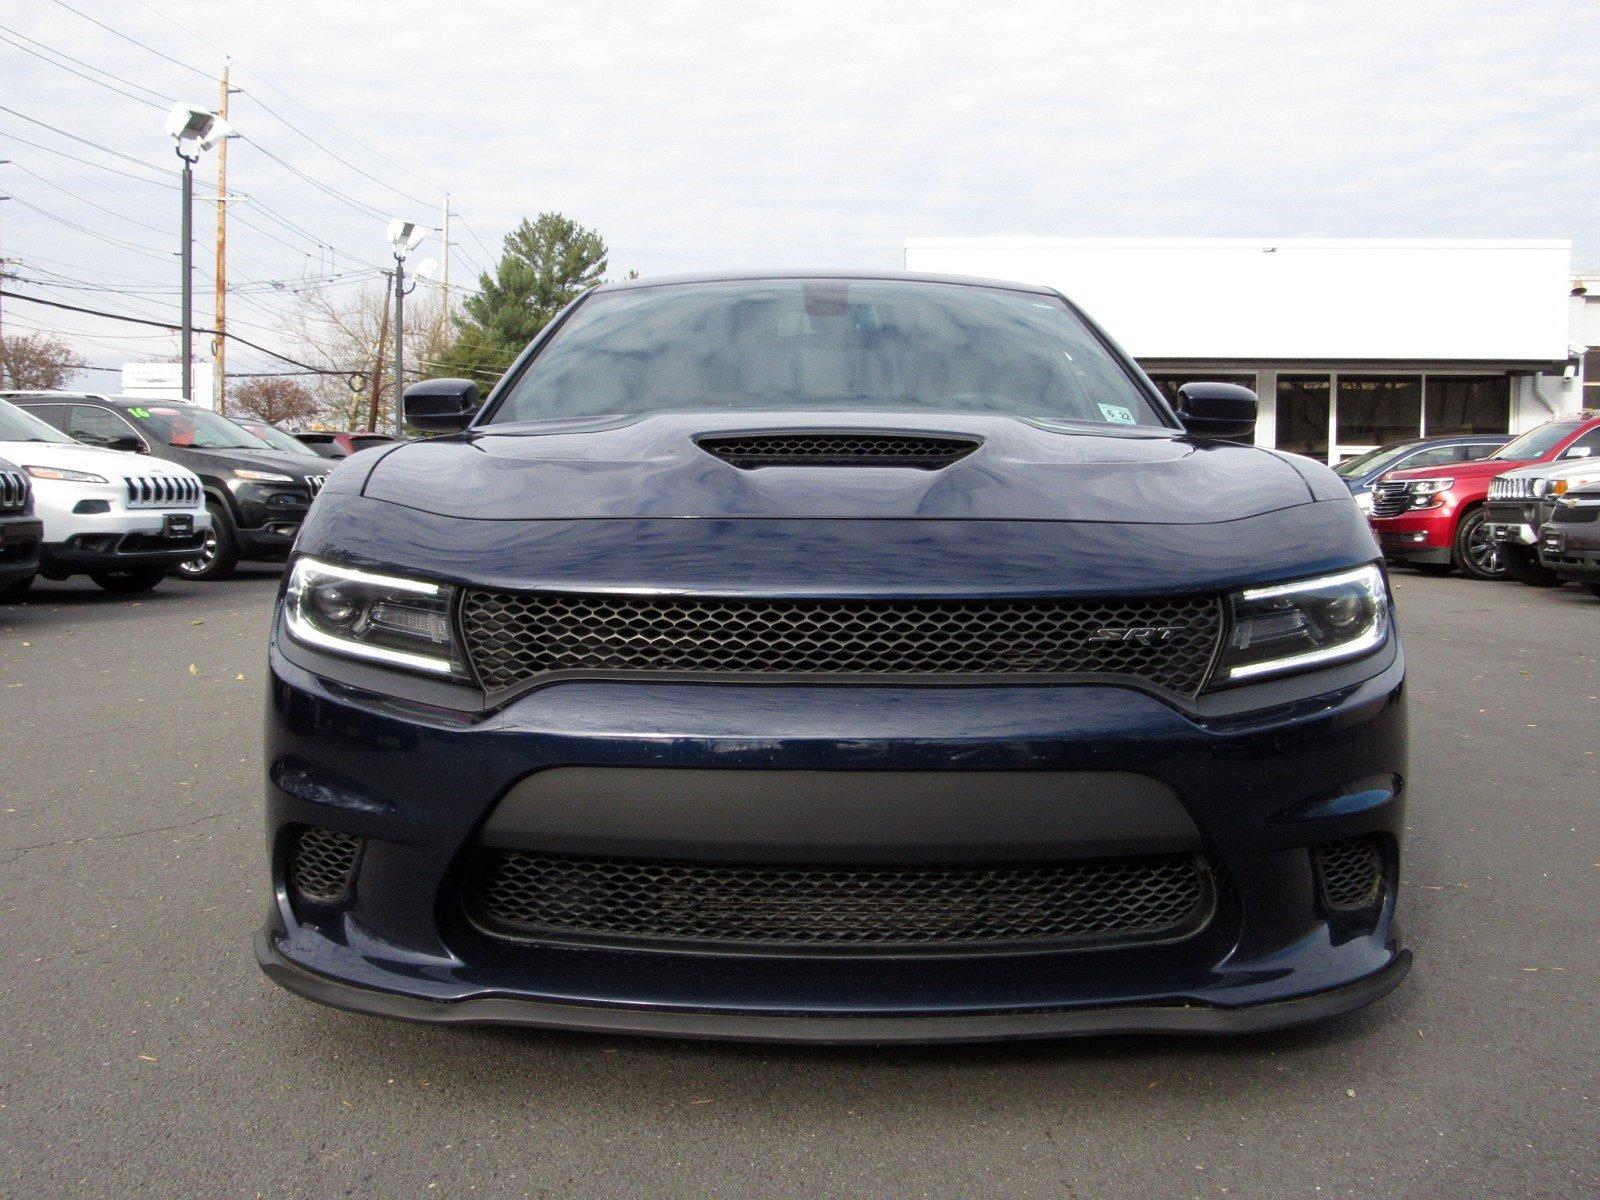 Used 2017 Dodge Charger SRT Hellcat For Sale ($53,995) | Victory Lotus ...